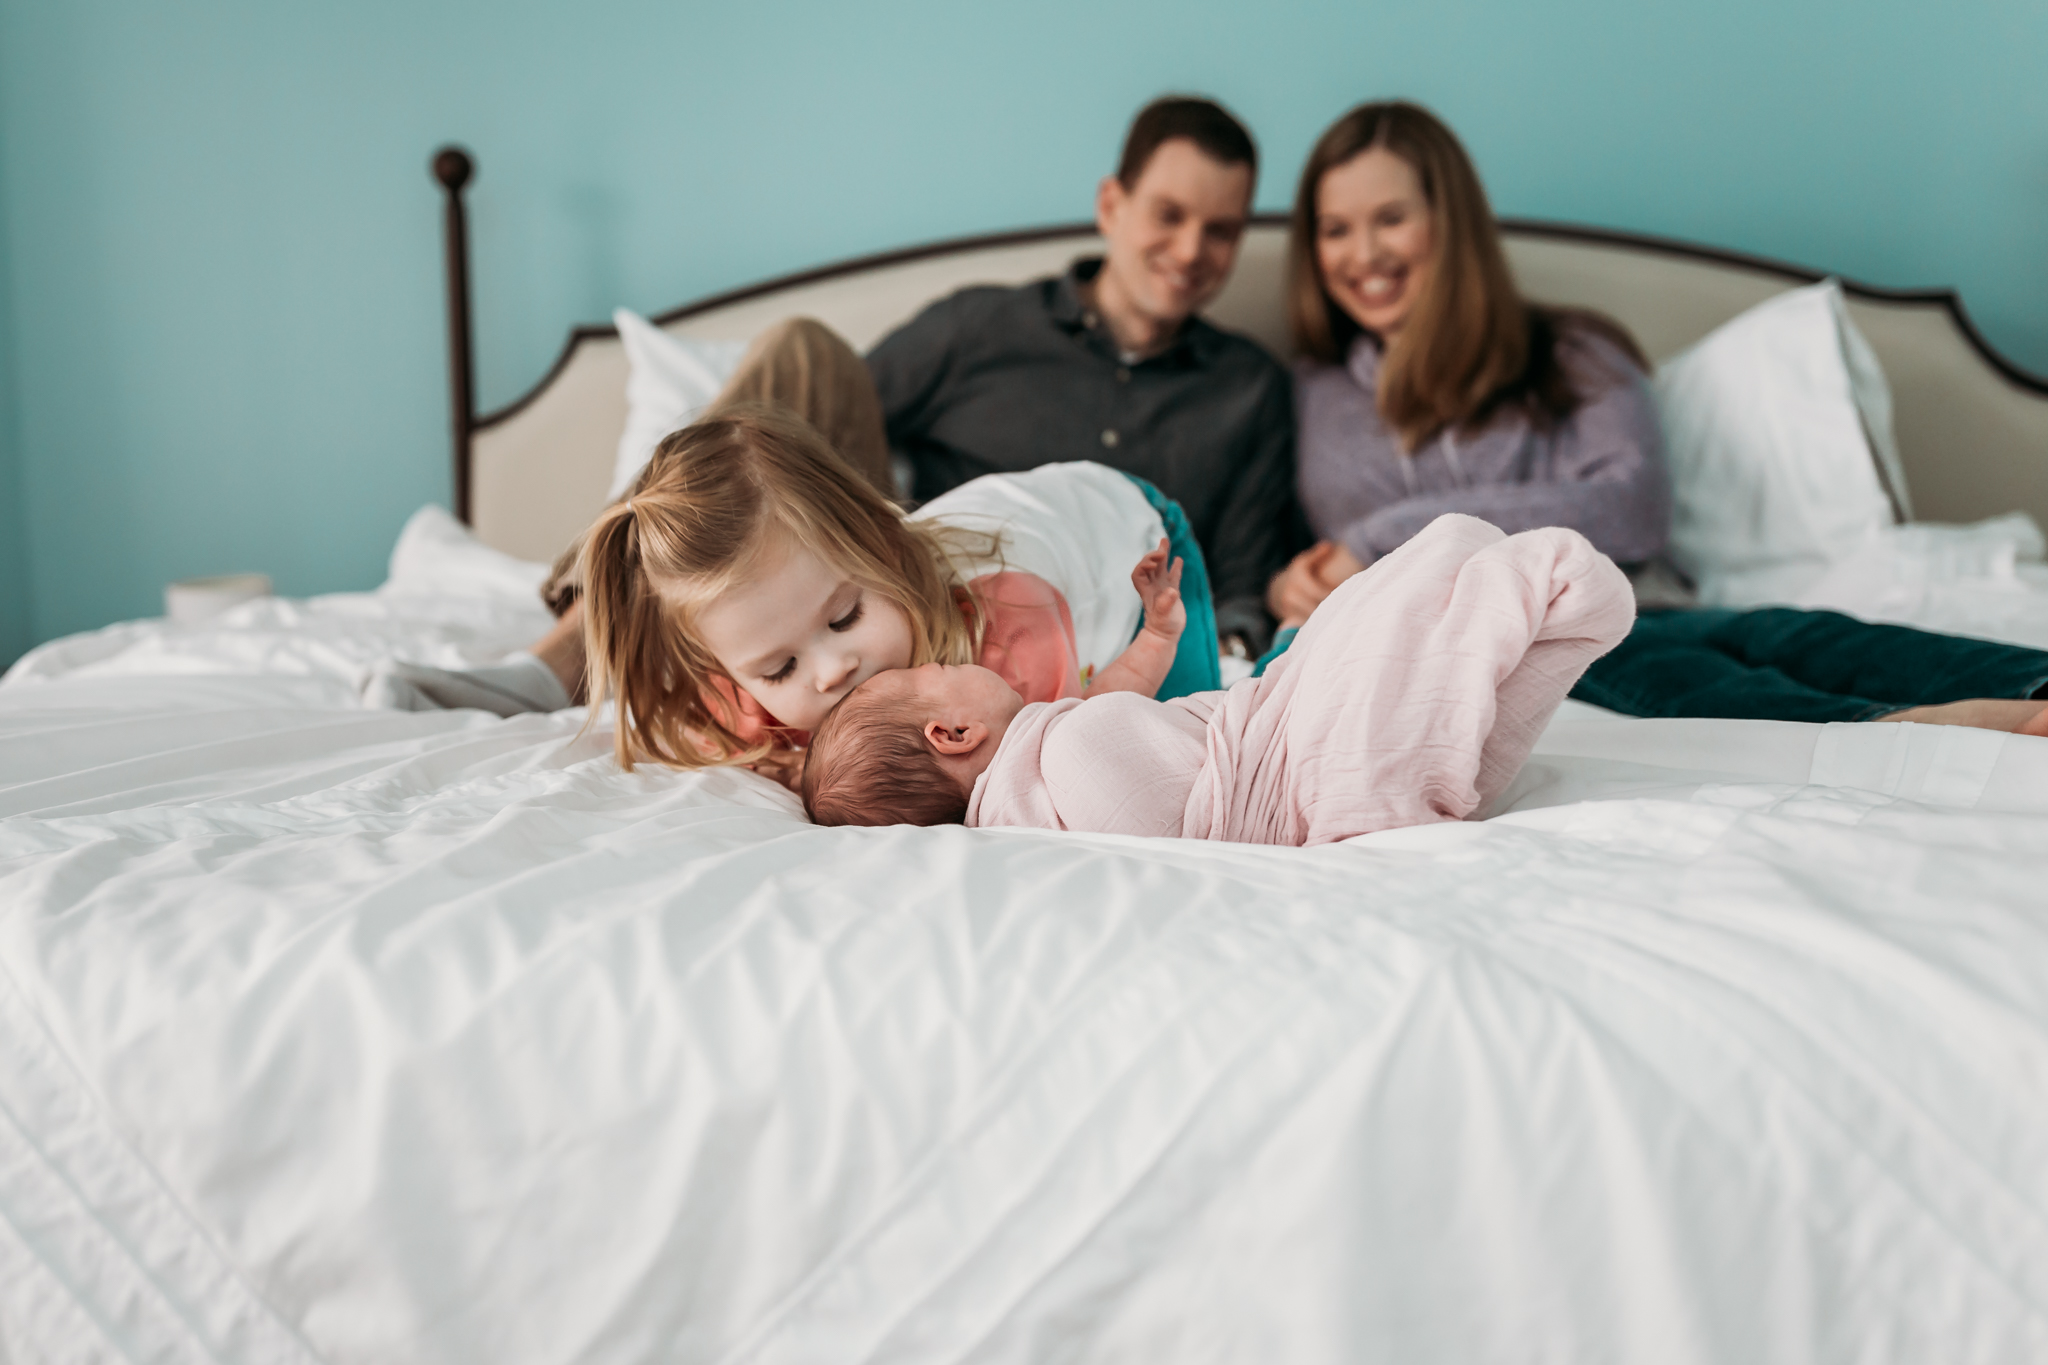 sister kisses newborn on bed while parents look on